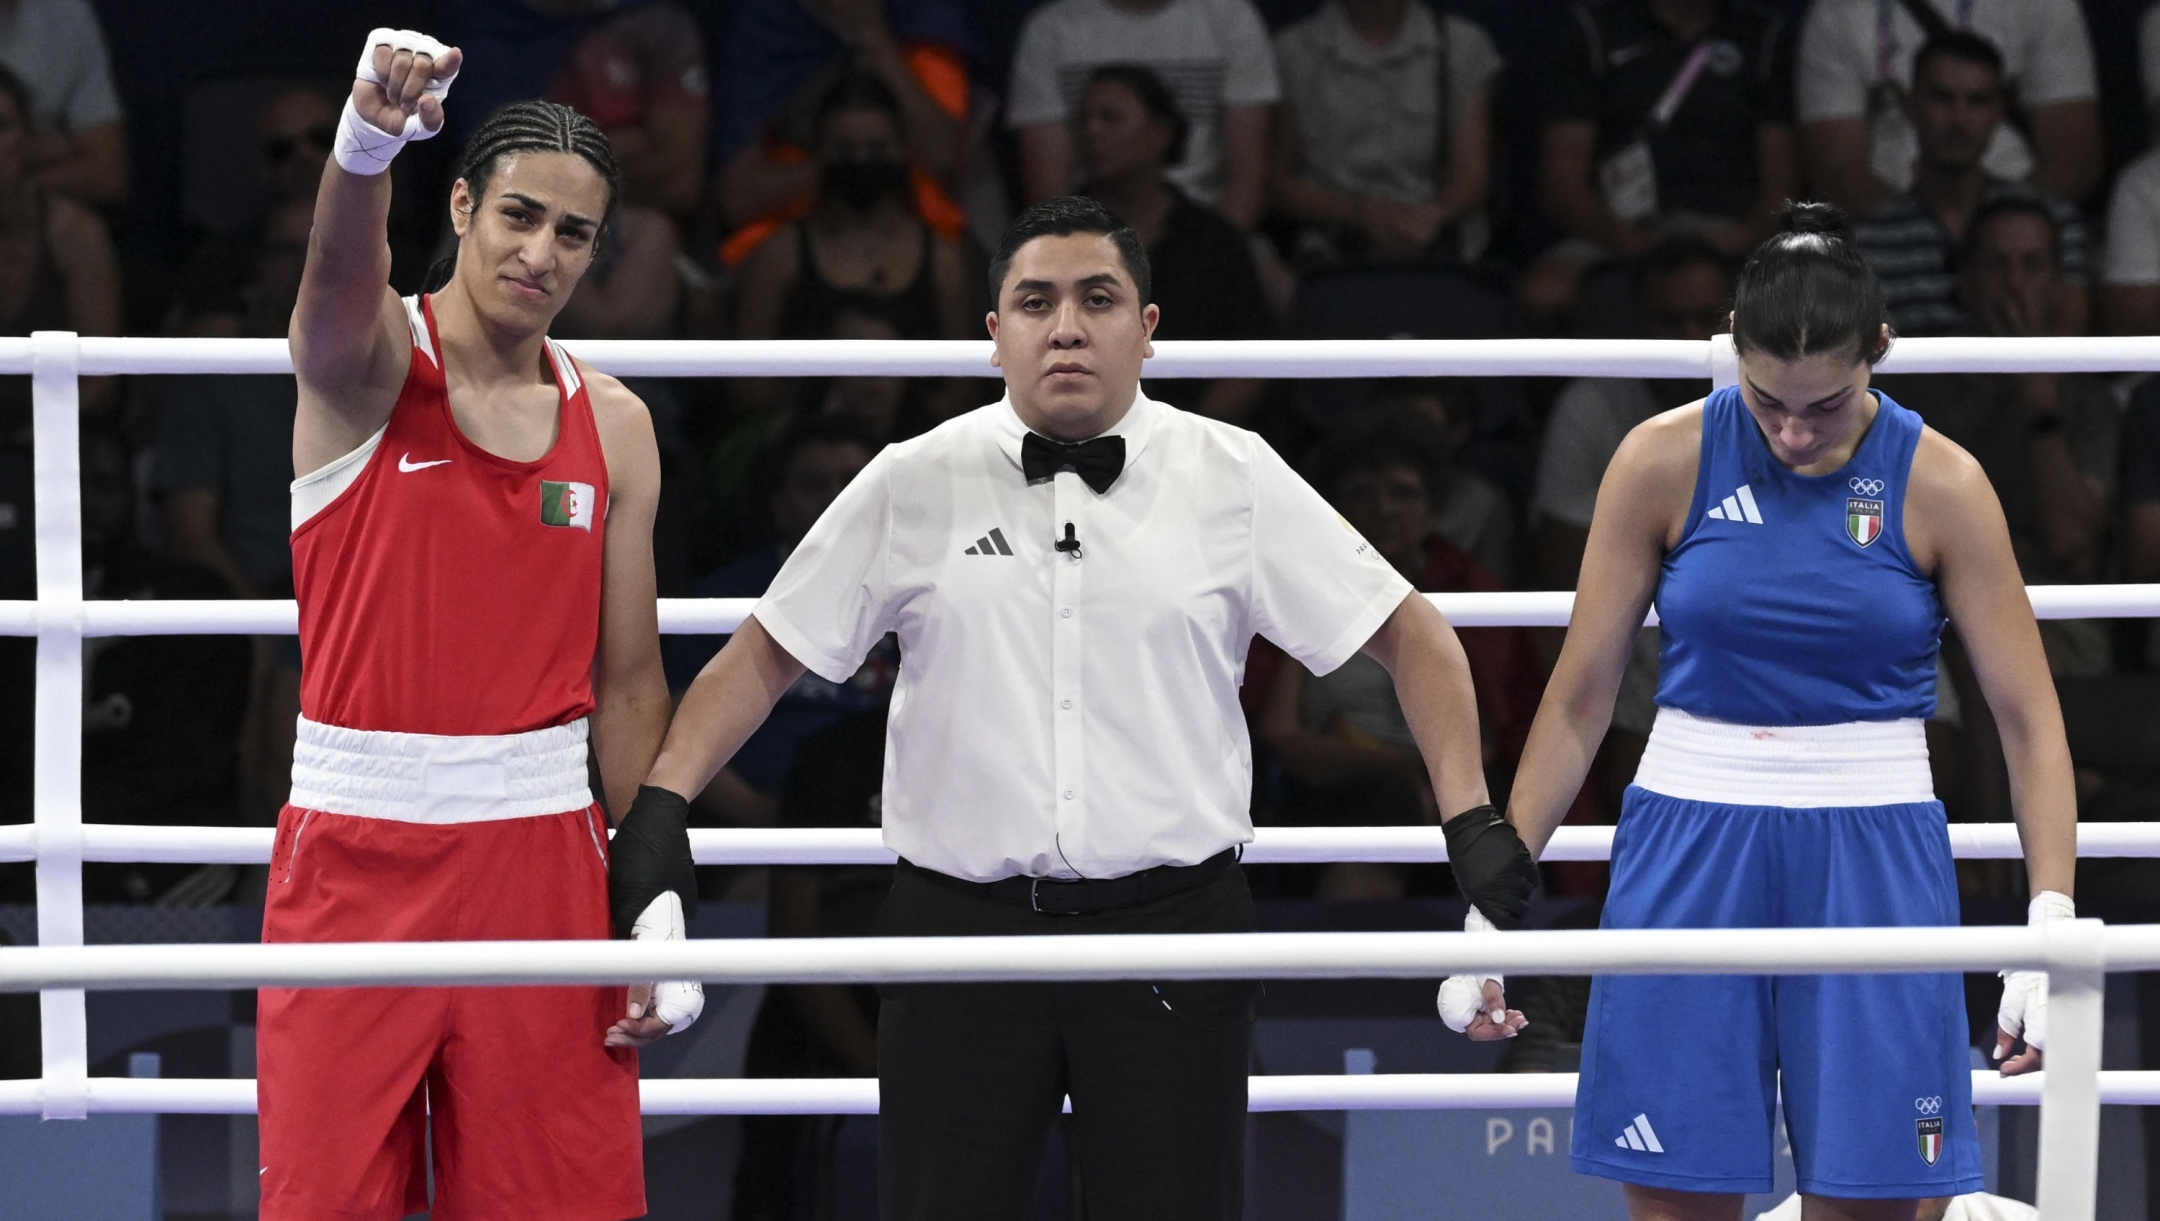 Imane Khelif  of Algeria  ( Red) Angela Carini  of Italy ( Bleu) in action during their women's 66kg preliminar round of 16 bout of the Boxing competitions in the Paris 2024 Olympic Games, at the North Paris Arena in Villepinte, France,  1 August 2024 . ANSA / CIRO FUSCO